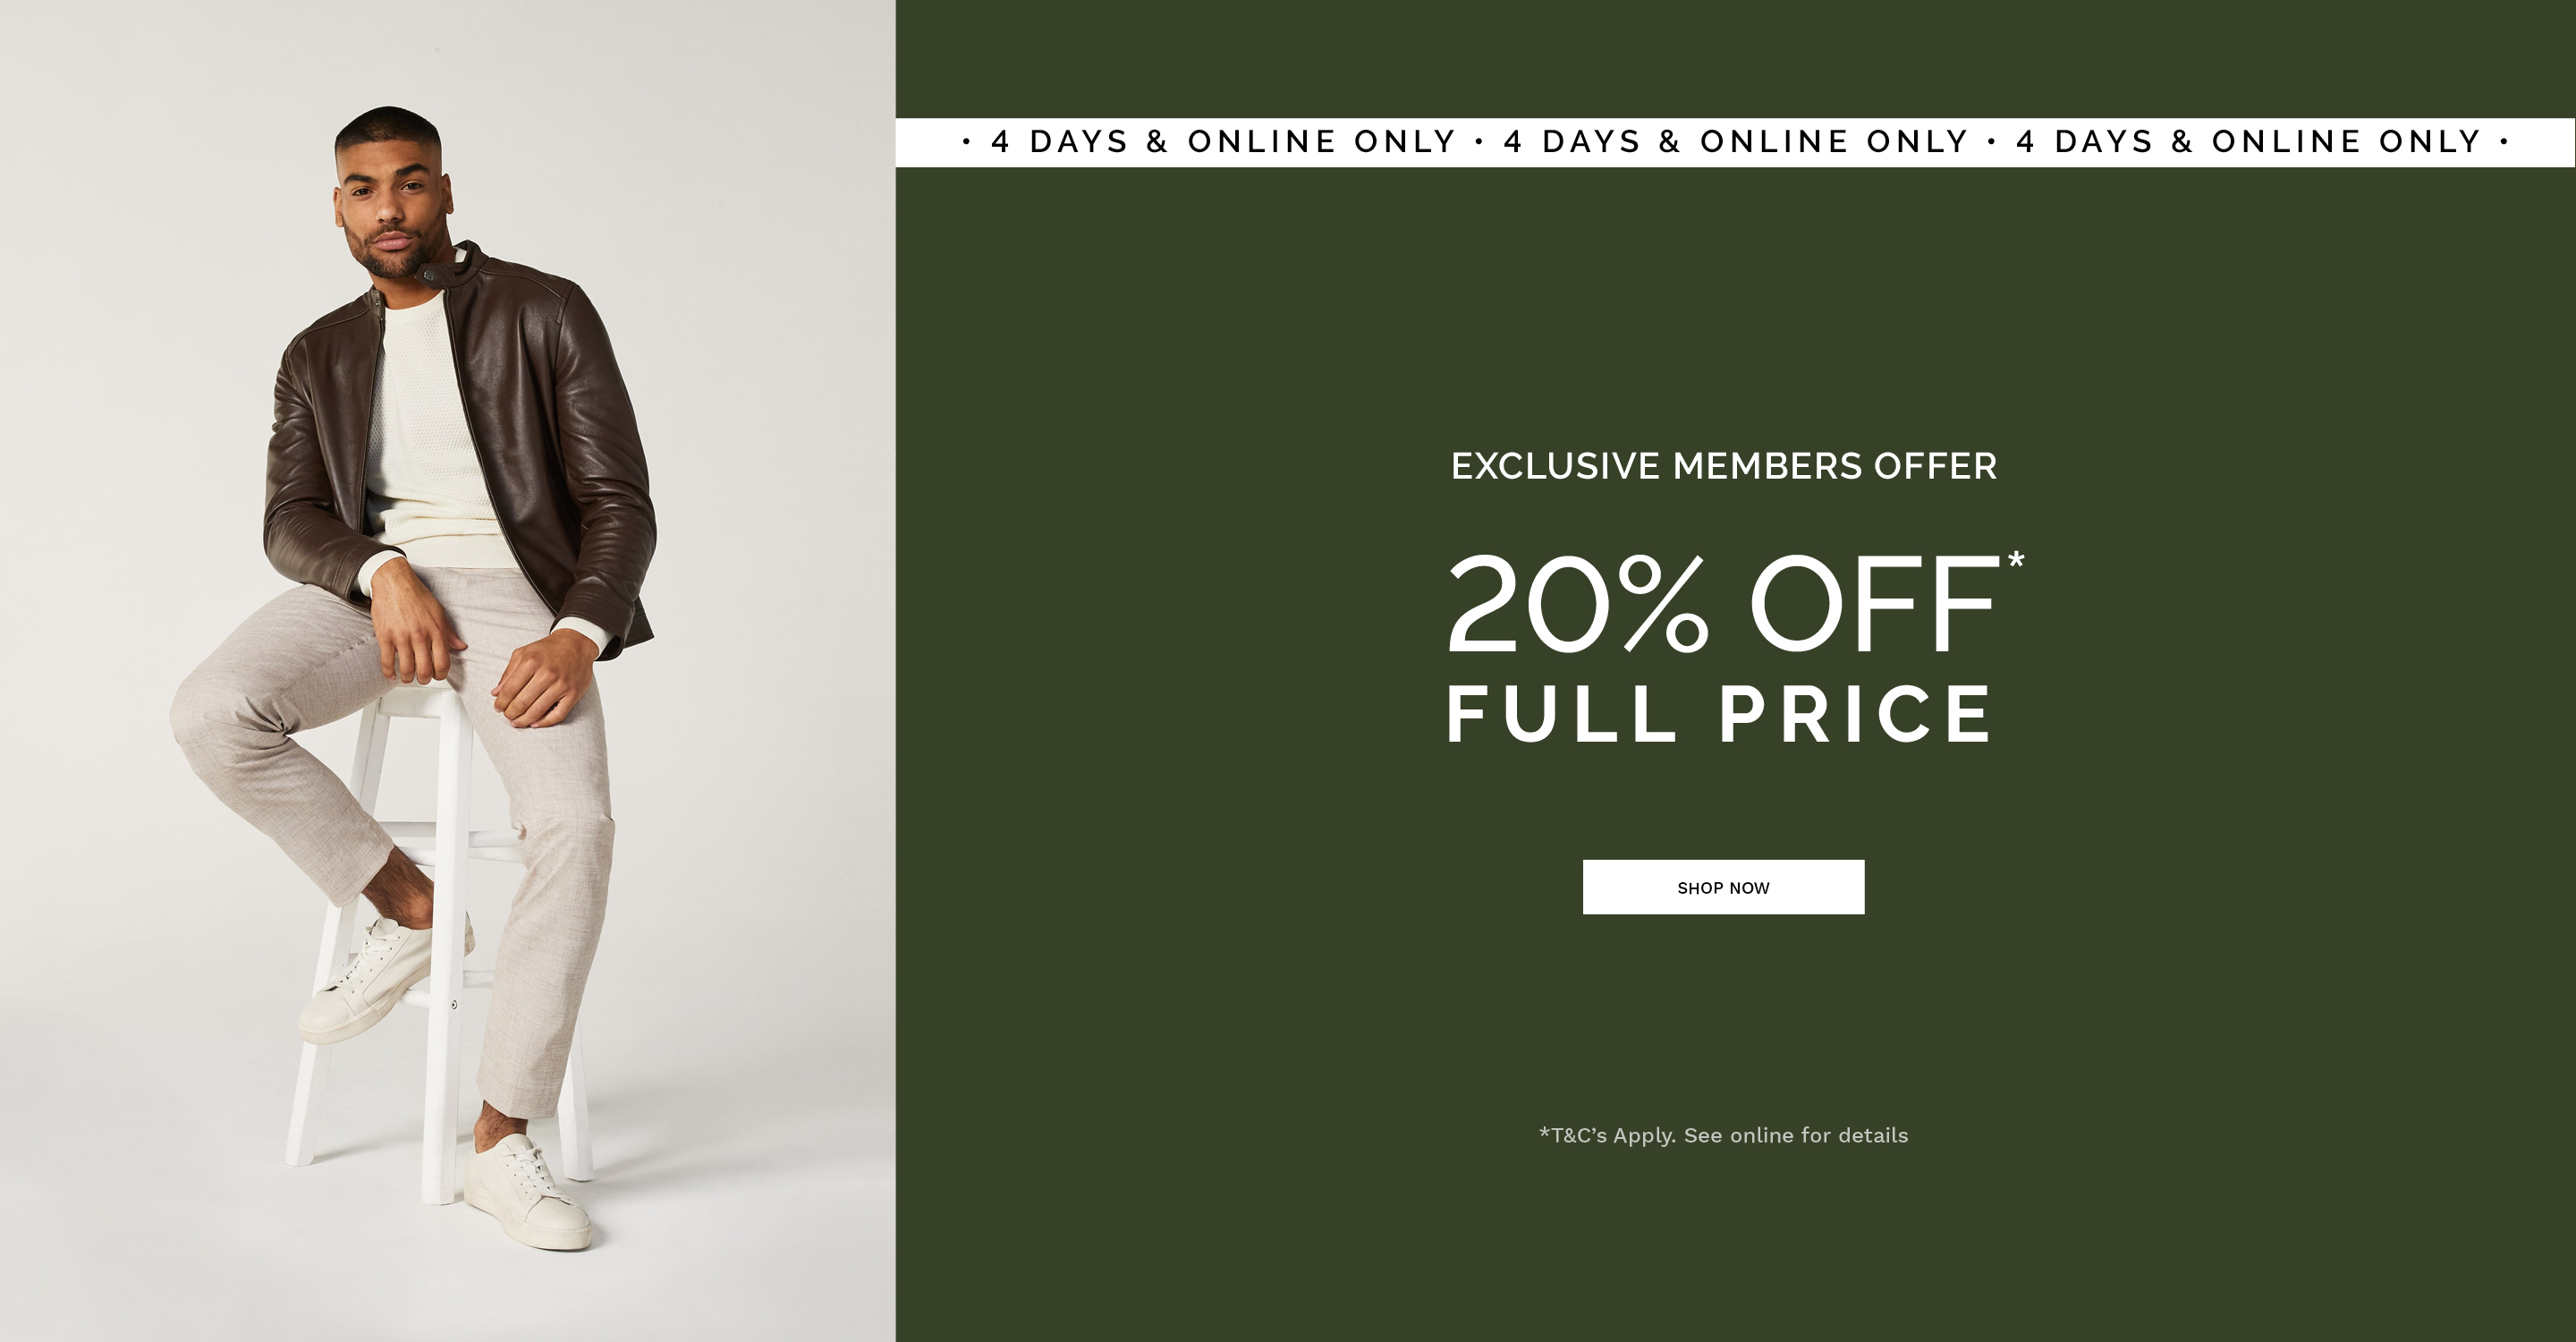 Exclusive Members Offer 20% OFF* Full Price - Shop Now